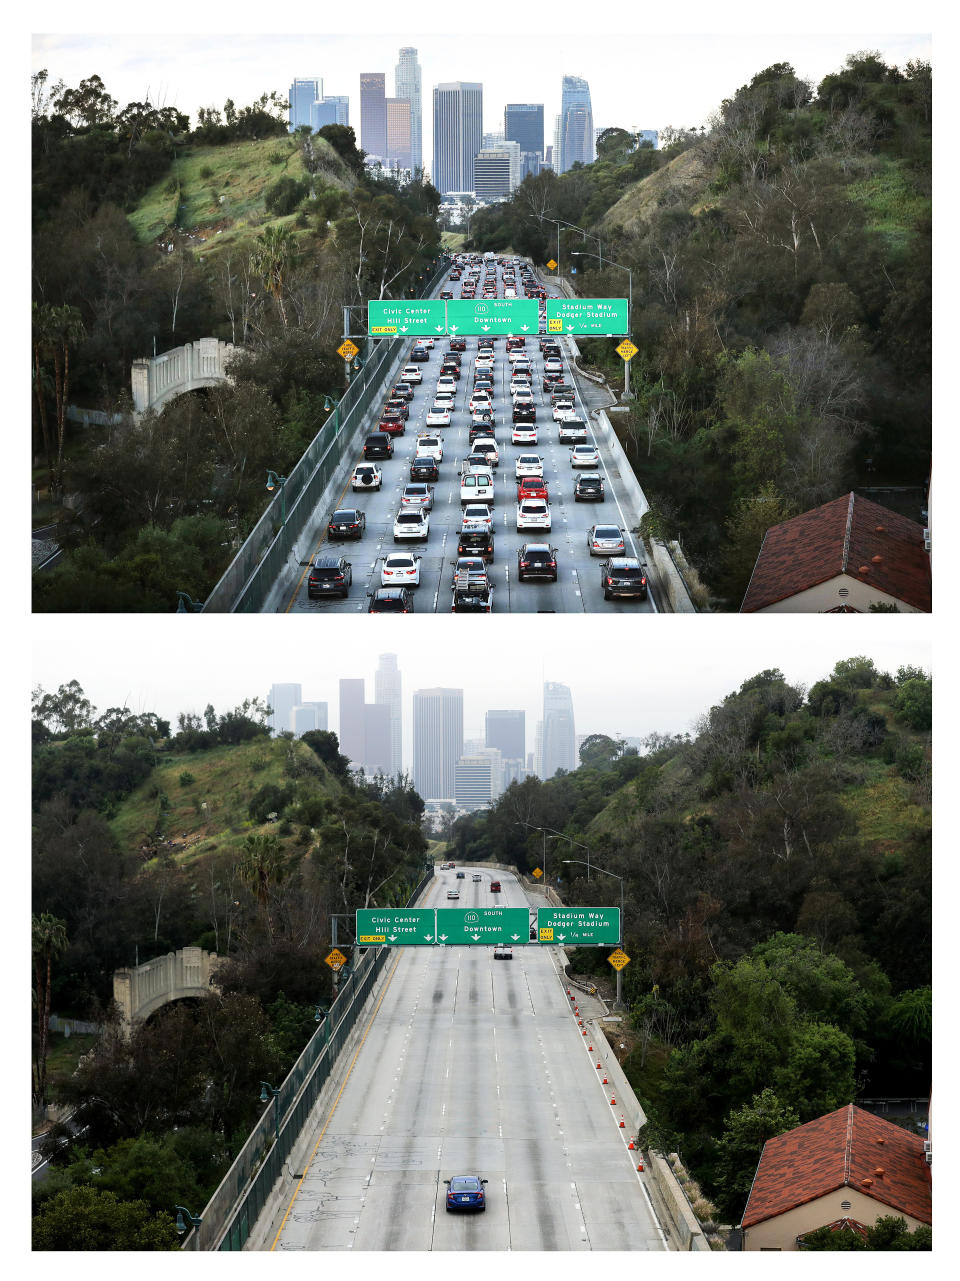 Contrasting images of morning rush hour on the 110 freeway a week before stay-at-home orders were issued in Los Angeles, and a photo of the freeway after the orders went into effect.